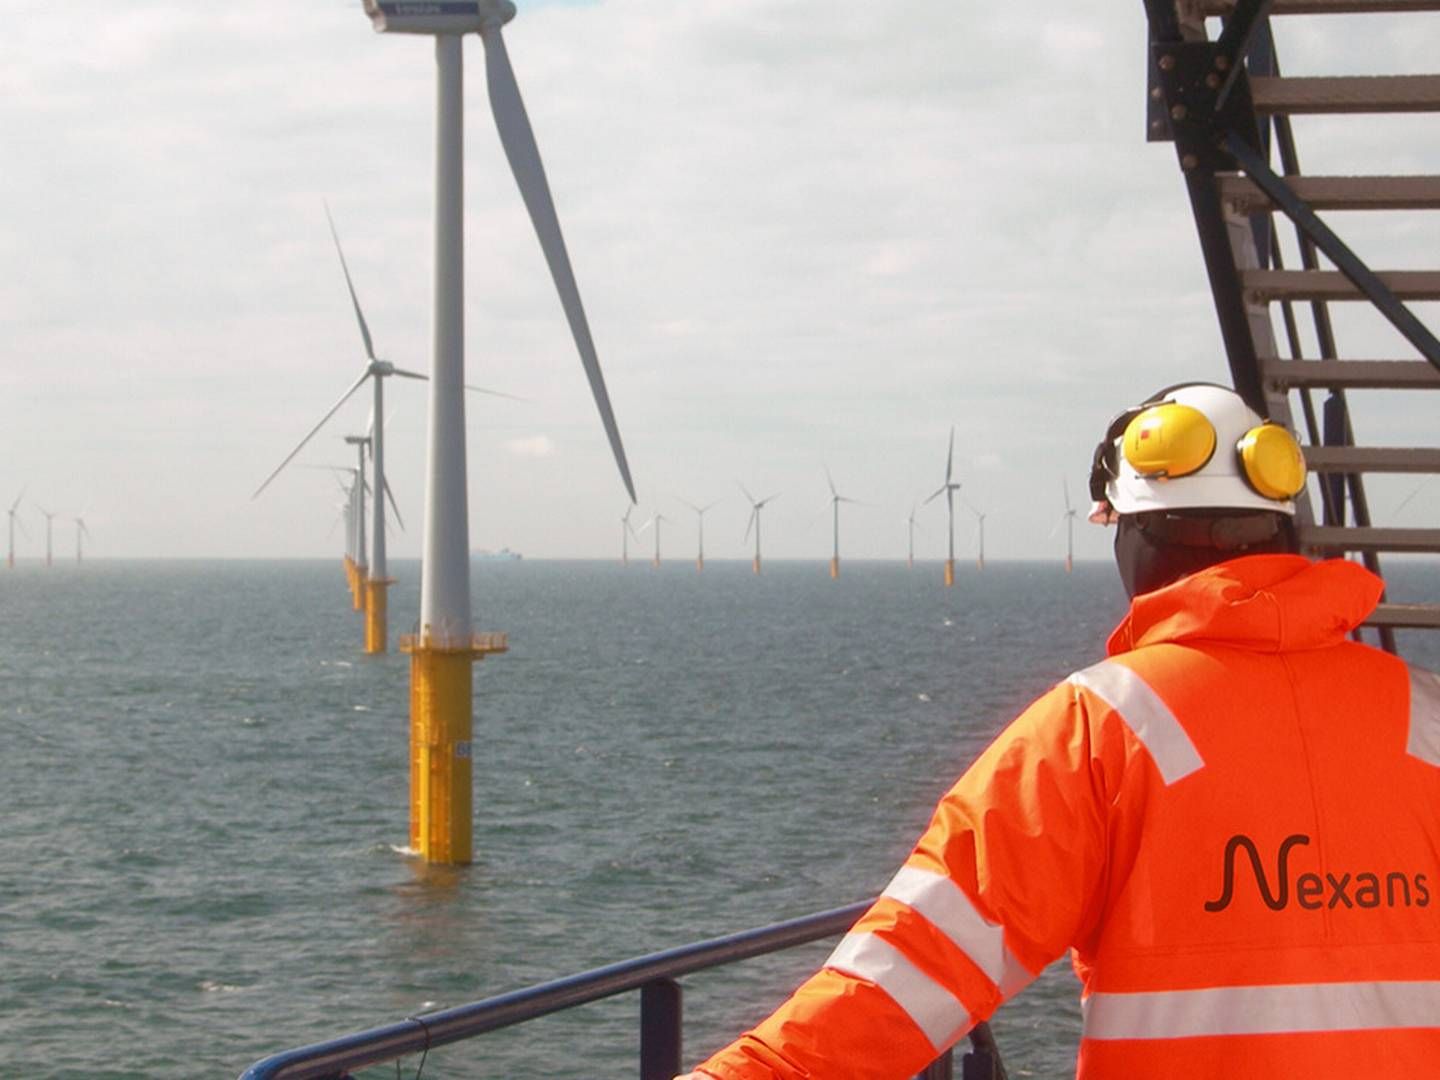 After a 12-year prelude, the first major offshore wind farm in France, Saint Brieuc, is slated for inauguration this year. And the winner from that time keeps raking in projects. | Foto: Pr / Nexans